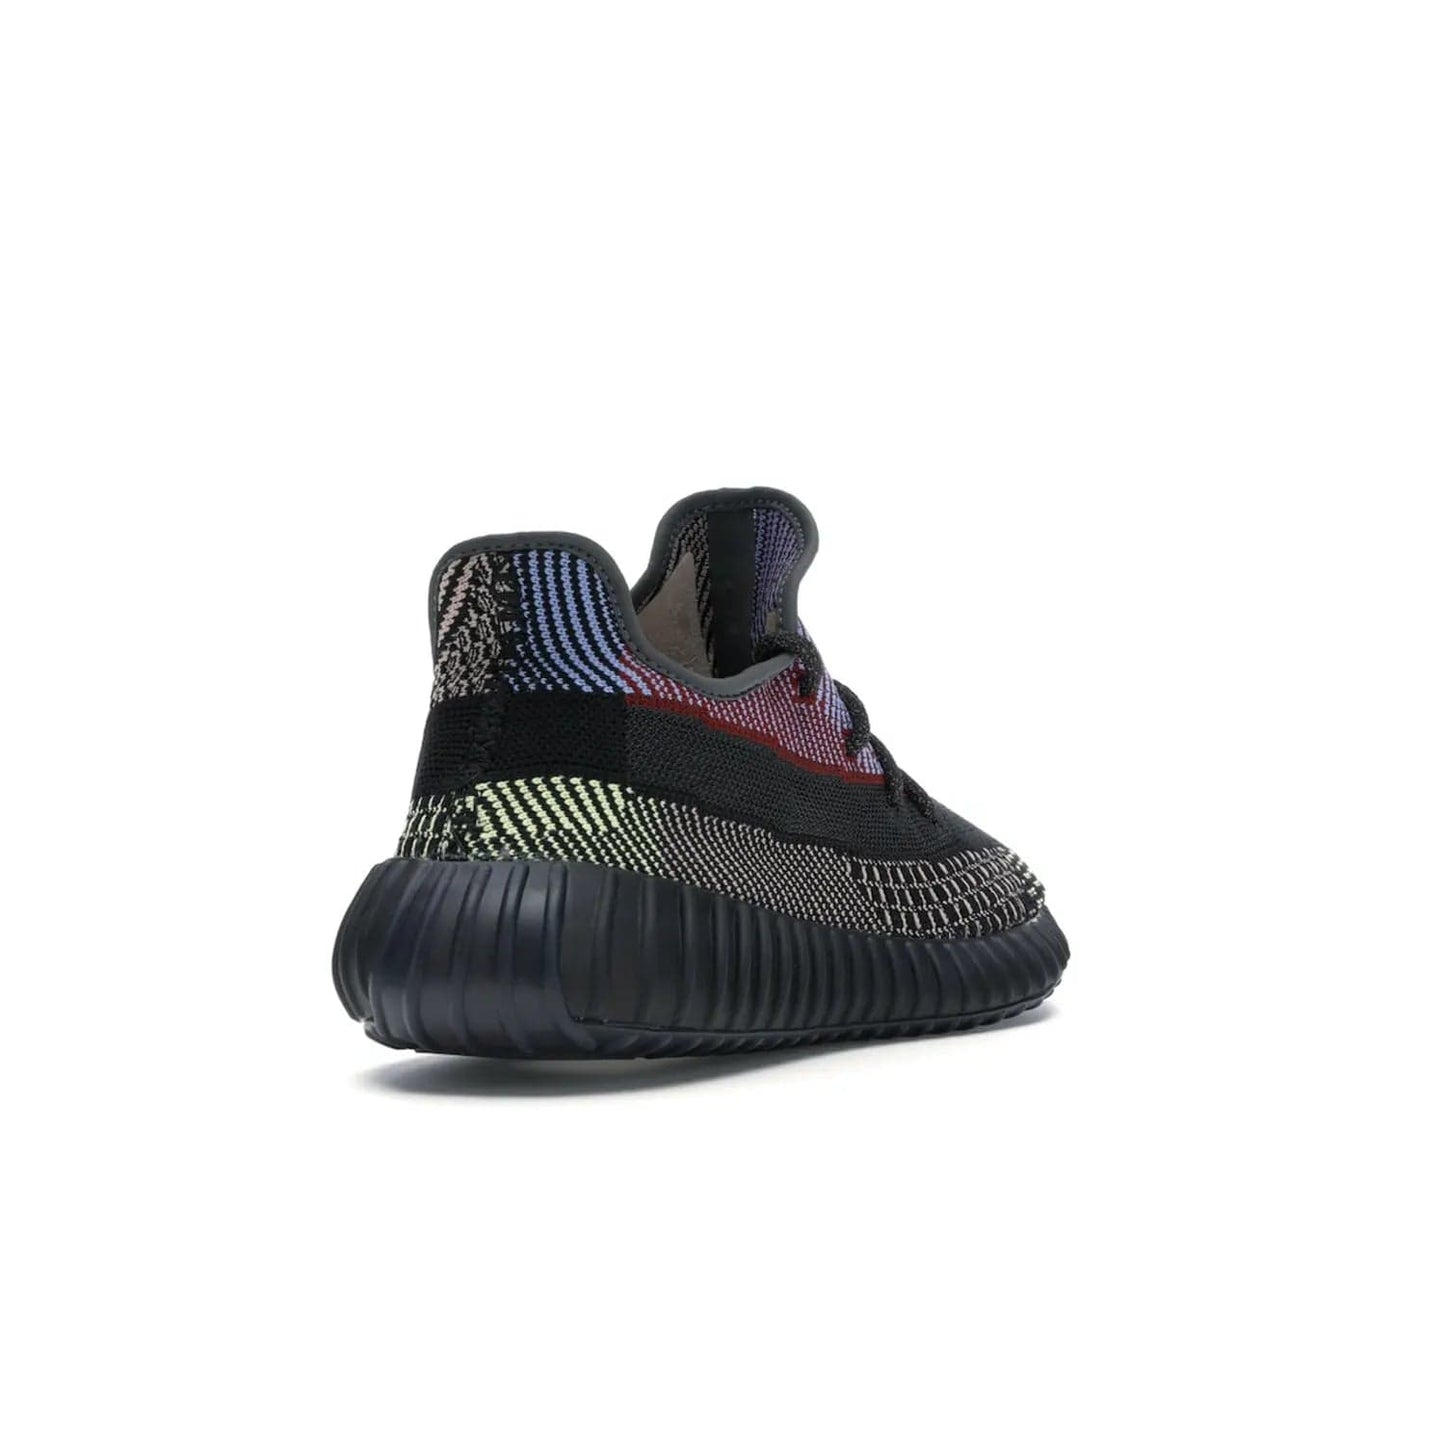 adidas Yeezy Boost 350 V2 Yecheil (Non-Reflective) - Image 31 - Only at www.BallersClubKickz.com - Make a statement with the eye-catching adidas Yeezy Boost 350 V2 Yecheil Non-Reflective. Featuring a spectrum of colorful hues, black upper, Boost cushioning, and black side stripe, the sneaker brings a luxe yet playful finish to any outfit.